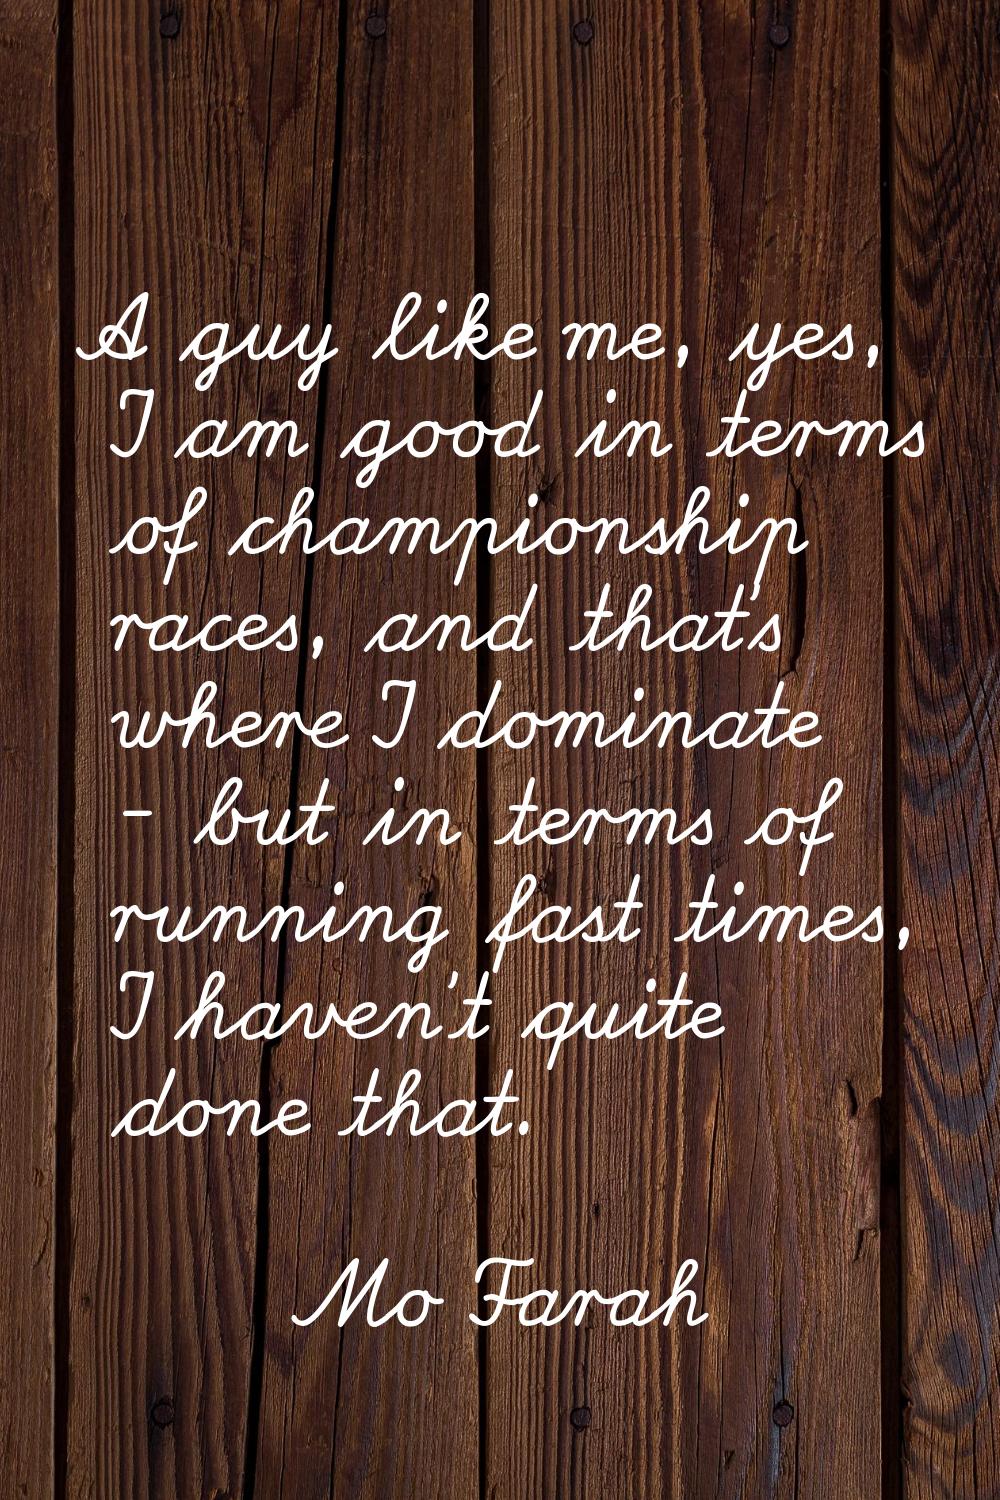 A guy like me, yes, I am good in terms of championship races, and that's where I dominate - but in 